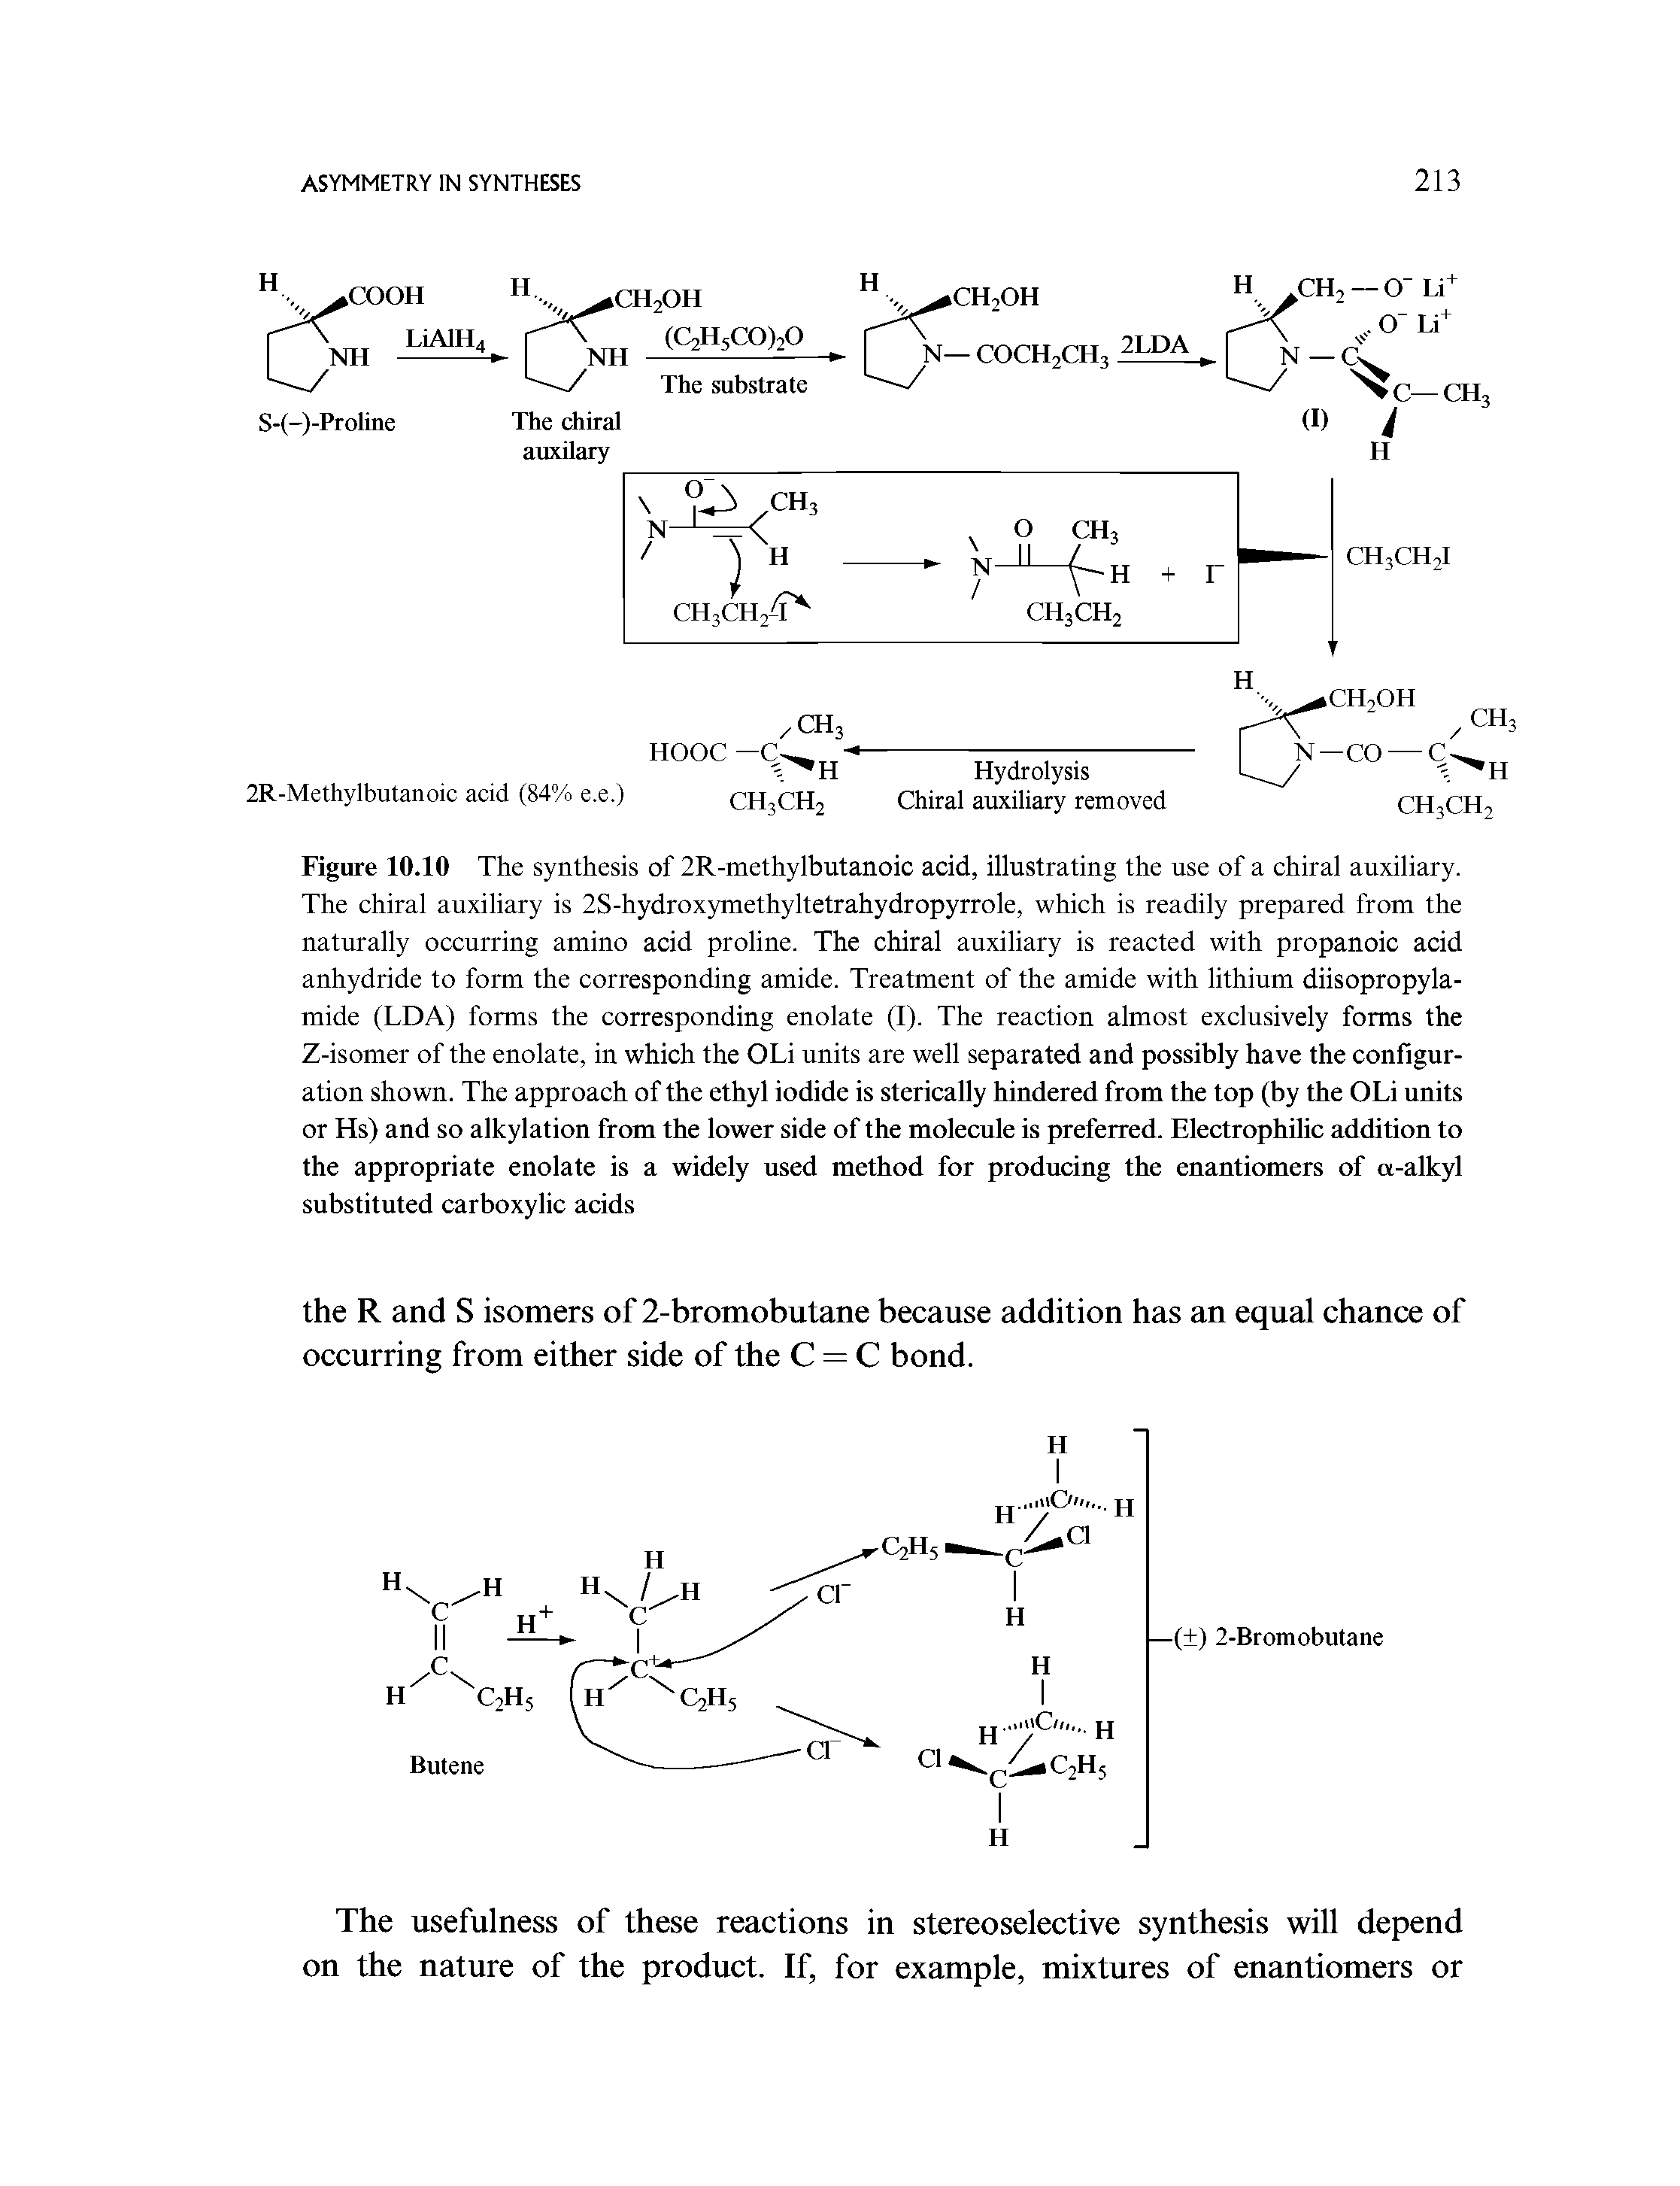 Figure 10.10 The synthesis of 2R-methylbutanoic acid, illustrating the use of a chiral auxiliary. The chiral auxiliary is 2S-hydroxymethyltetrahydropyrrole, which is readily prepared from the naturally occurring amino acid proline. The chiral auxiliary is reacted with propanoic acid anhydride to form the corresponding amide. Treatment of the amide with lithium diisopropyla-mide (LDA) forms the corresponding enolate (I). The reaction almost exclusively forms the Z-isomer of the enolate, in which the OLi units are well separated and possibly have the configuration shown. The approach of the ethyl iodide is sterically hindered from the top (by the OLi units or Hs) and so alkylation from the lower side of the molecule is preferred. Electrophilic addition to the appropriate enolate is a widely used method for producing the enantiomers of a-alkyl substituted carboxylic acids...